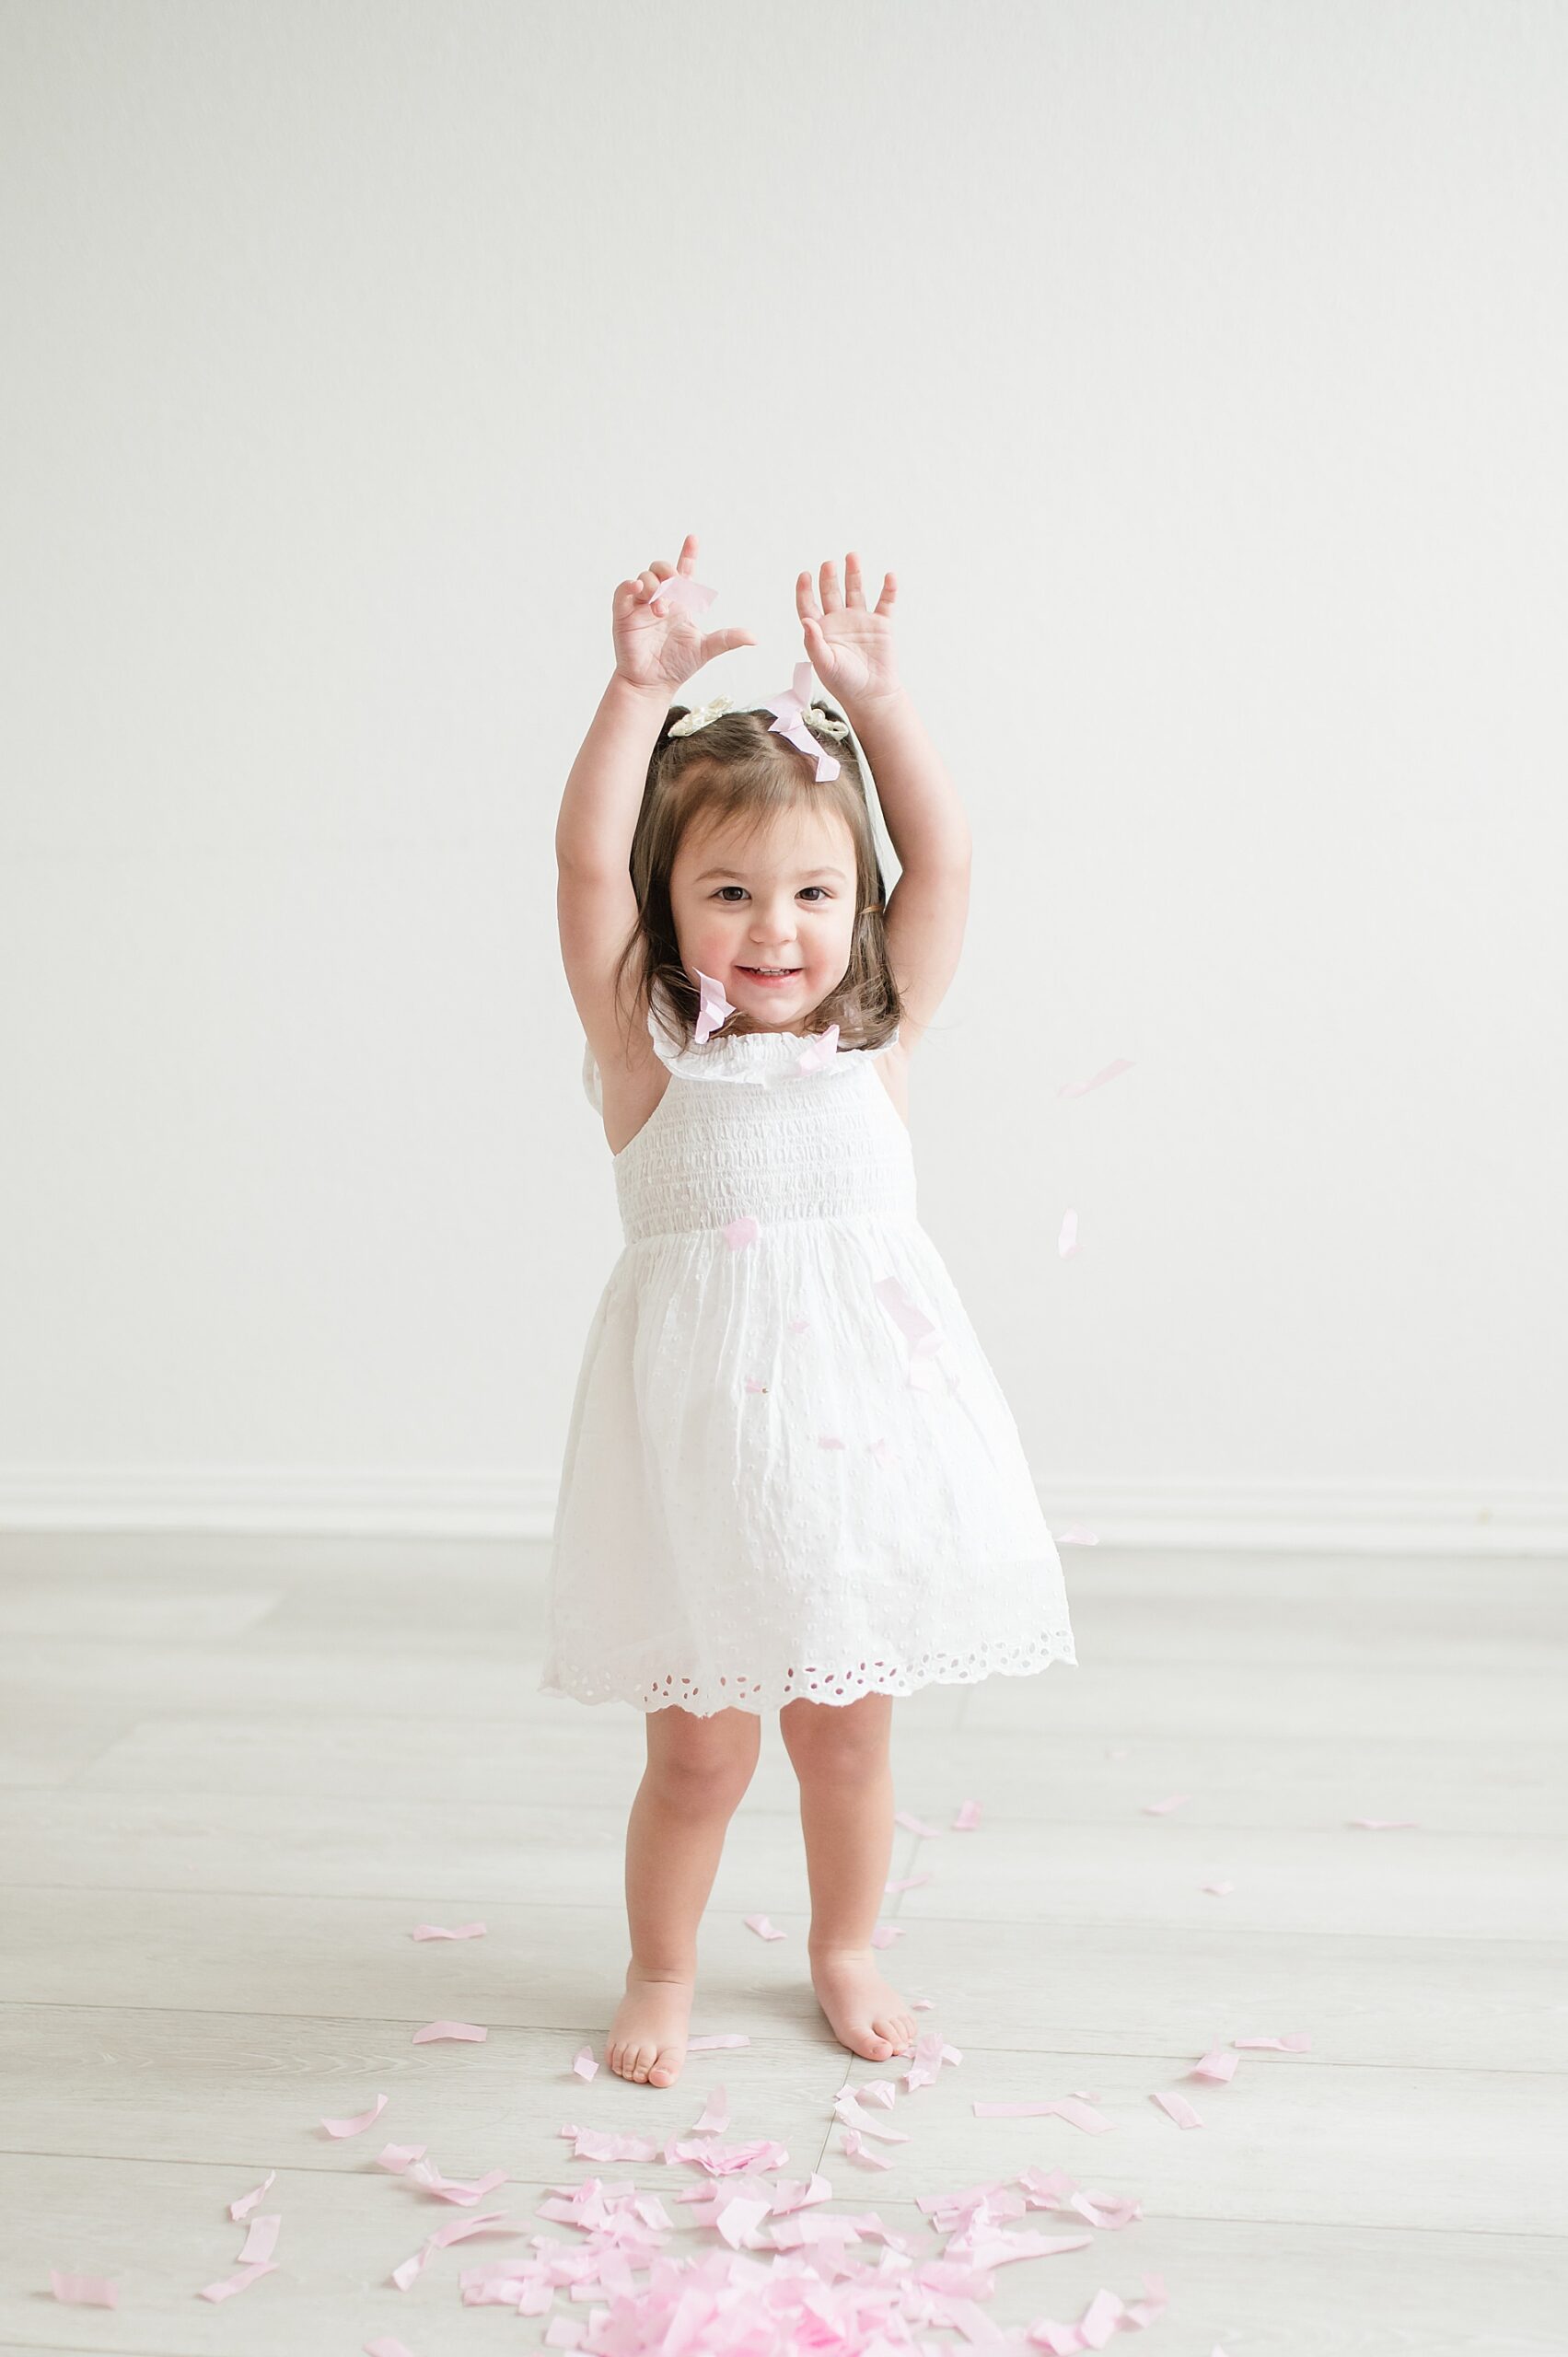 little girl in white dress plays in pink confetti from gender reveal photo session taken by Lindsey Dutton Photography, a Dallas Maternity photographer
